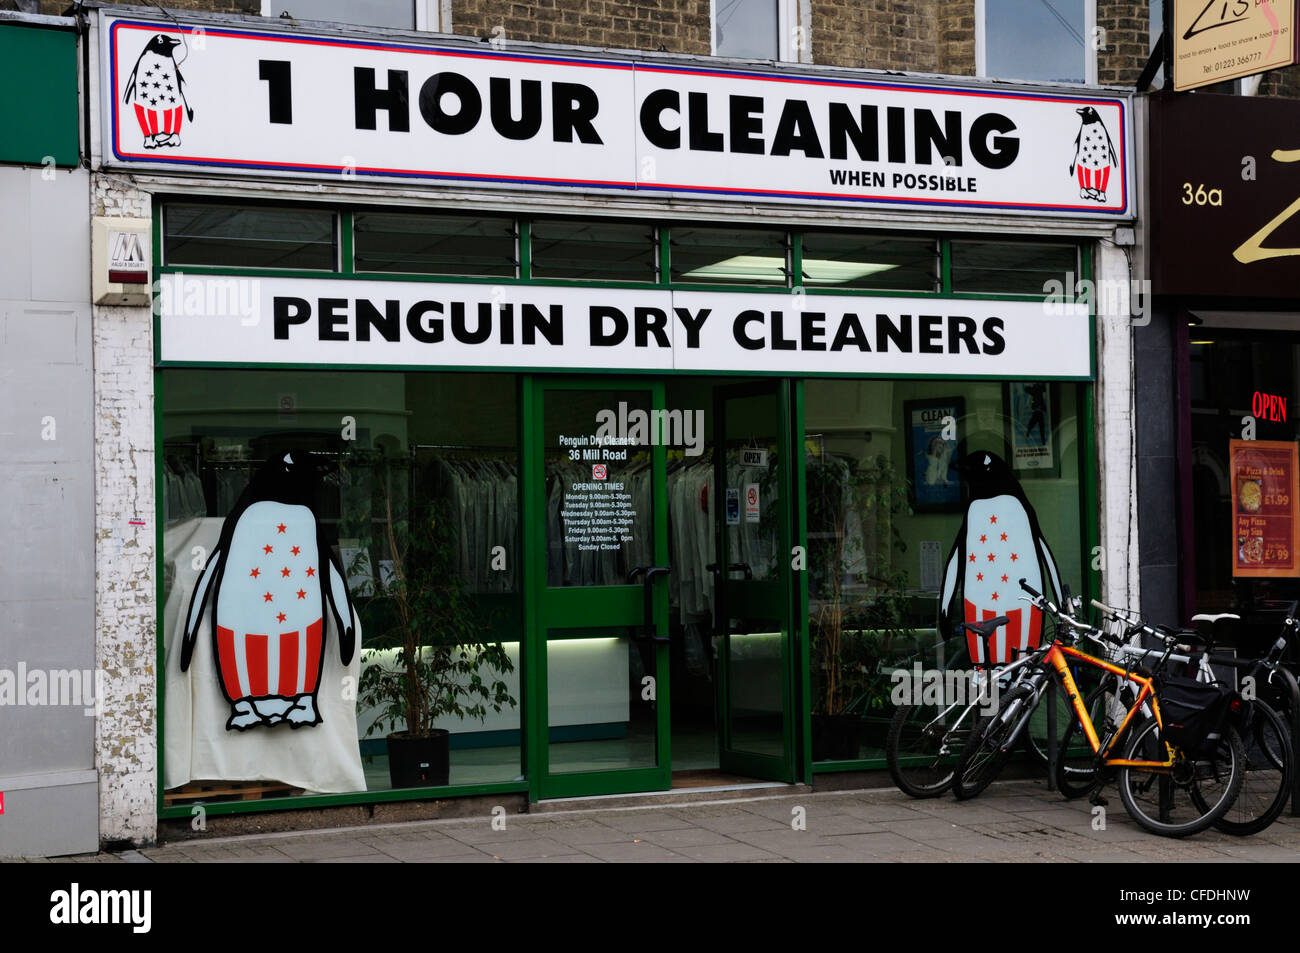 Penguin Dry Cleaners, Mill Road, Cambridge, England, UK Banque D'Images